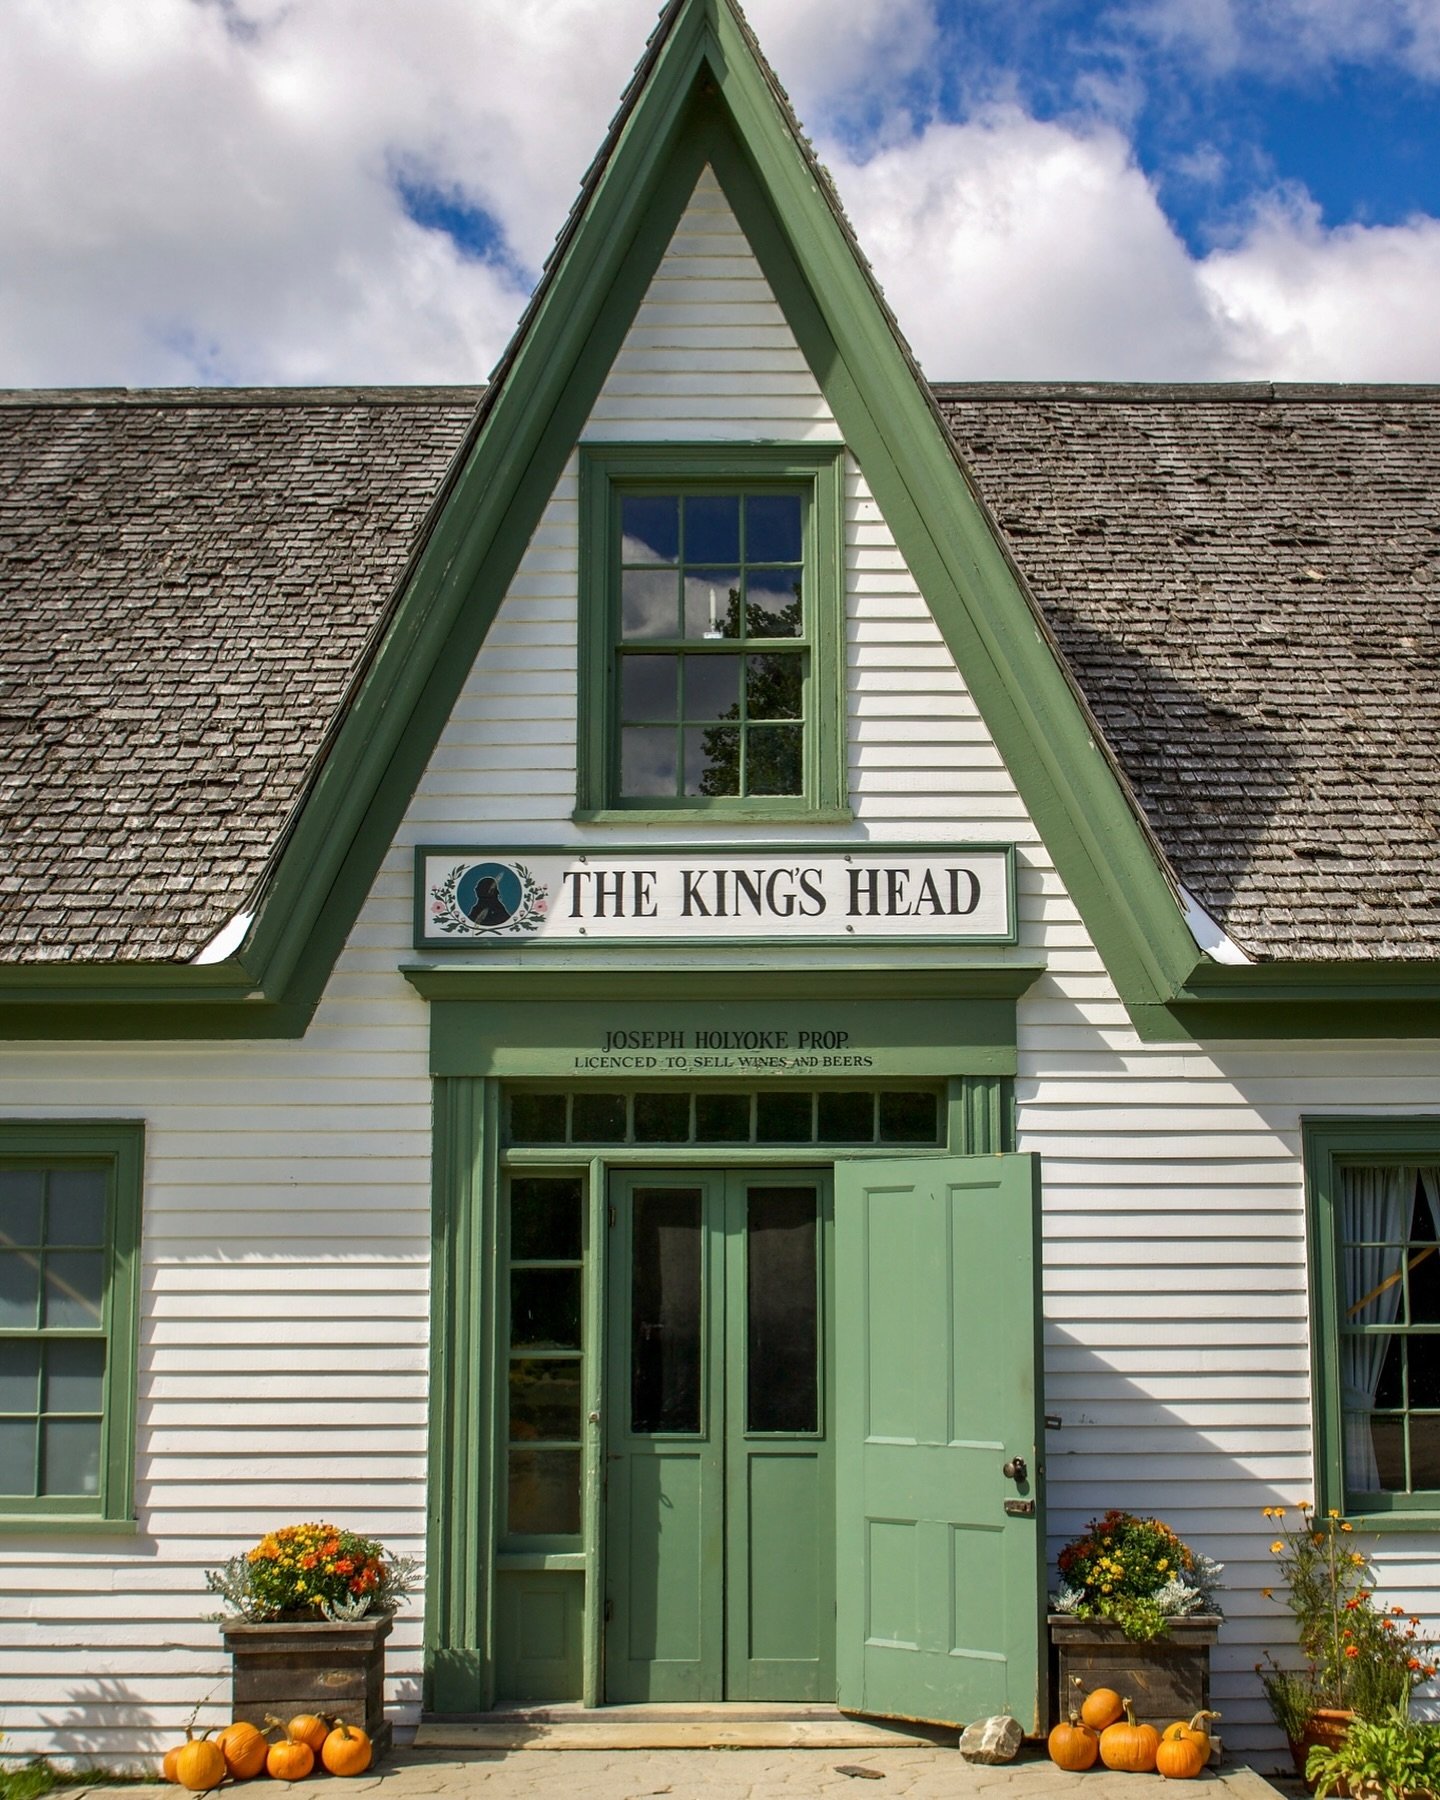 Kings Landing Historical Settlement has been bringing history to life for 50 years! This living museum, located in Prince William, New Brunswick first opened its doors in 1974 and is excited to welcome visitors back in 2024 to help celebrate this lan